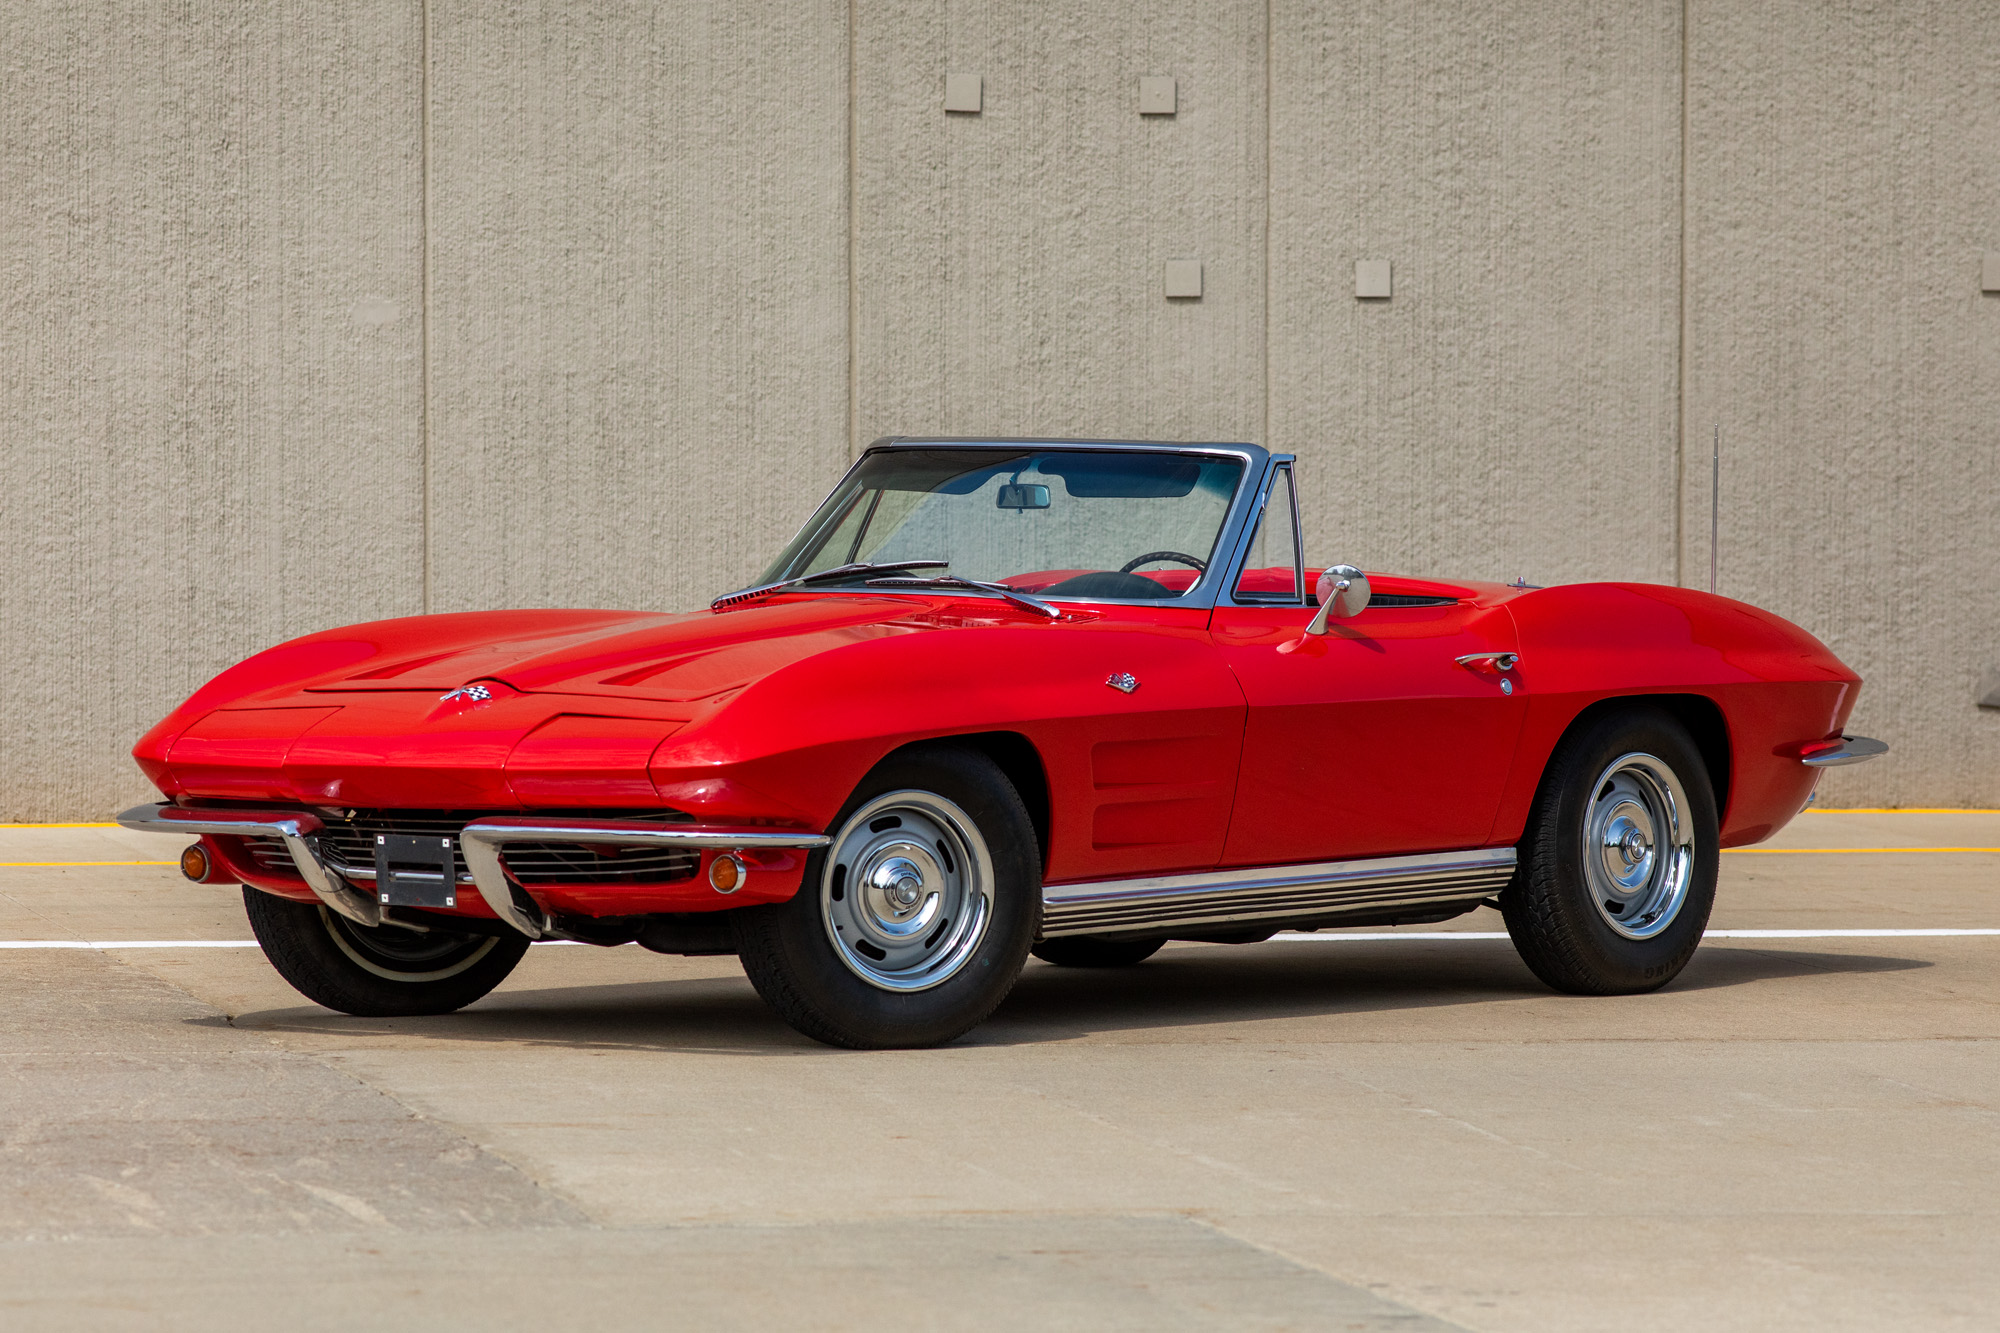 No Reserve Auction for a 1964 Corvette Roadster Ends TODAY! Bidding Now at ,500 at 427Stingray.com